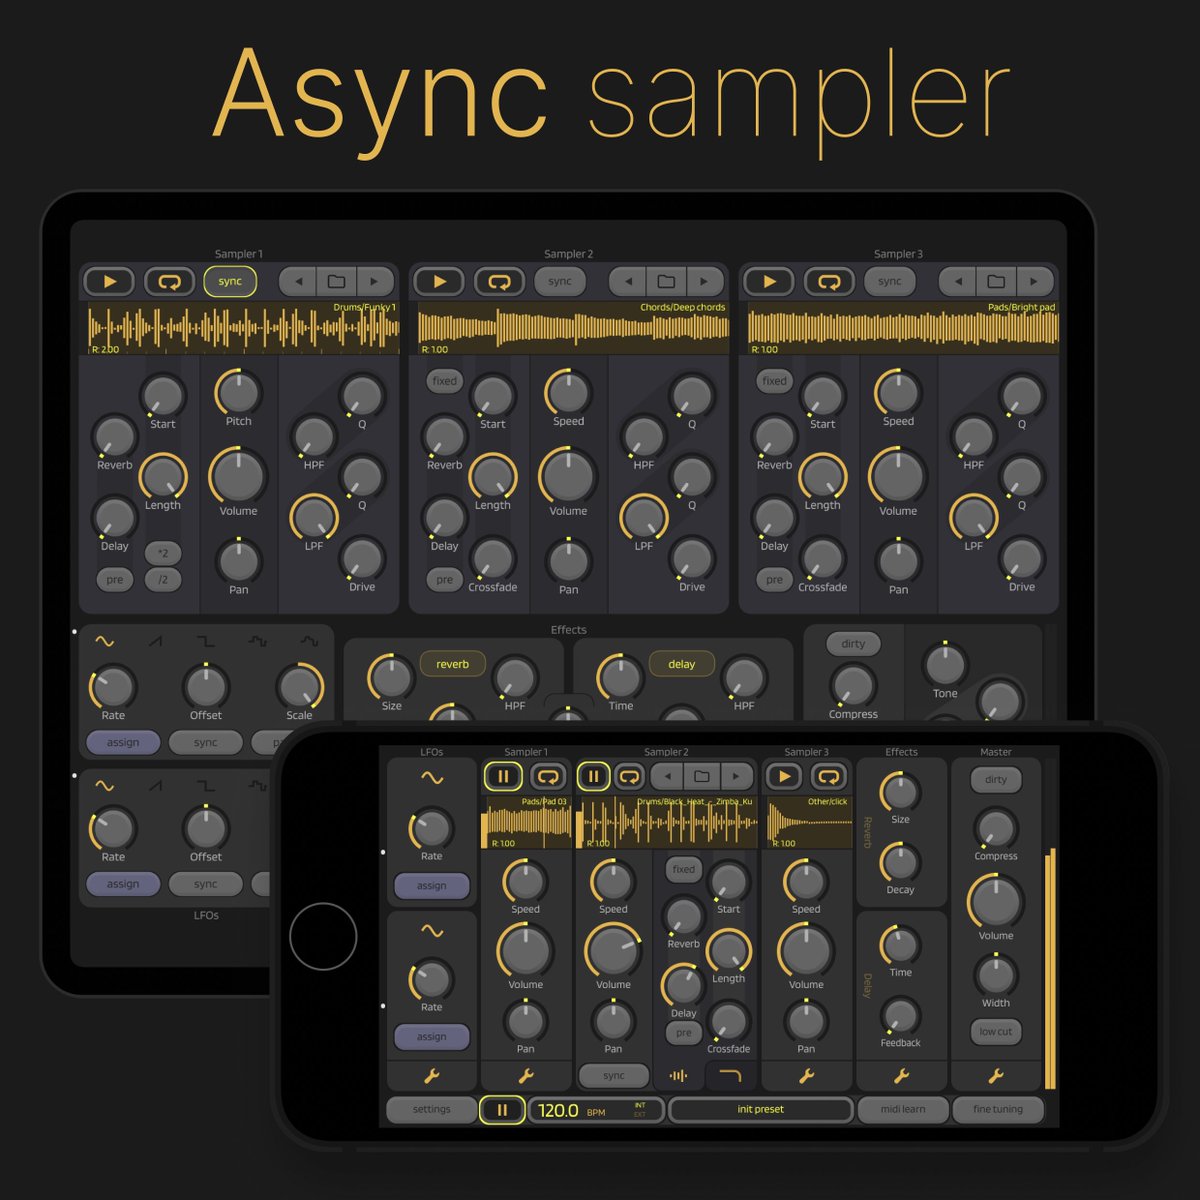 We have released Async Sampler!
The app is available for iPad and iPhone as Standalone or AUv3.



#asyncsampler #iosmusic #iosmusicproduction #sampler #mobilemusic #froggolab #ambient #jungle #ipadmusician #ipadmusic #granularsynthesis #auv3 #iosmusicapps #tapeloop #looper